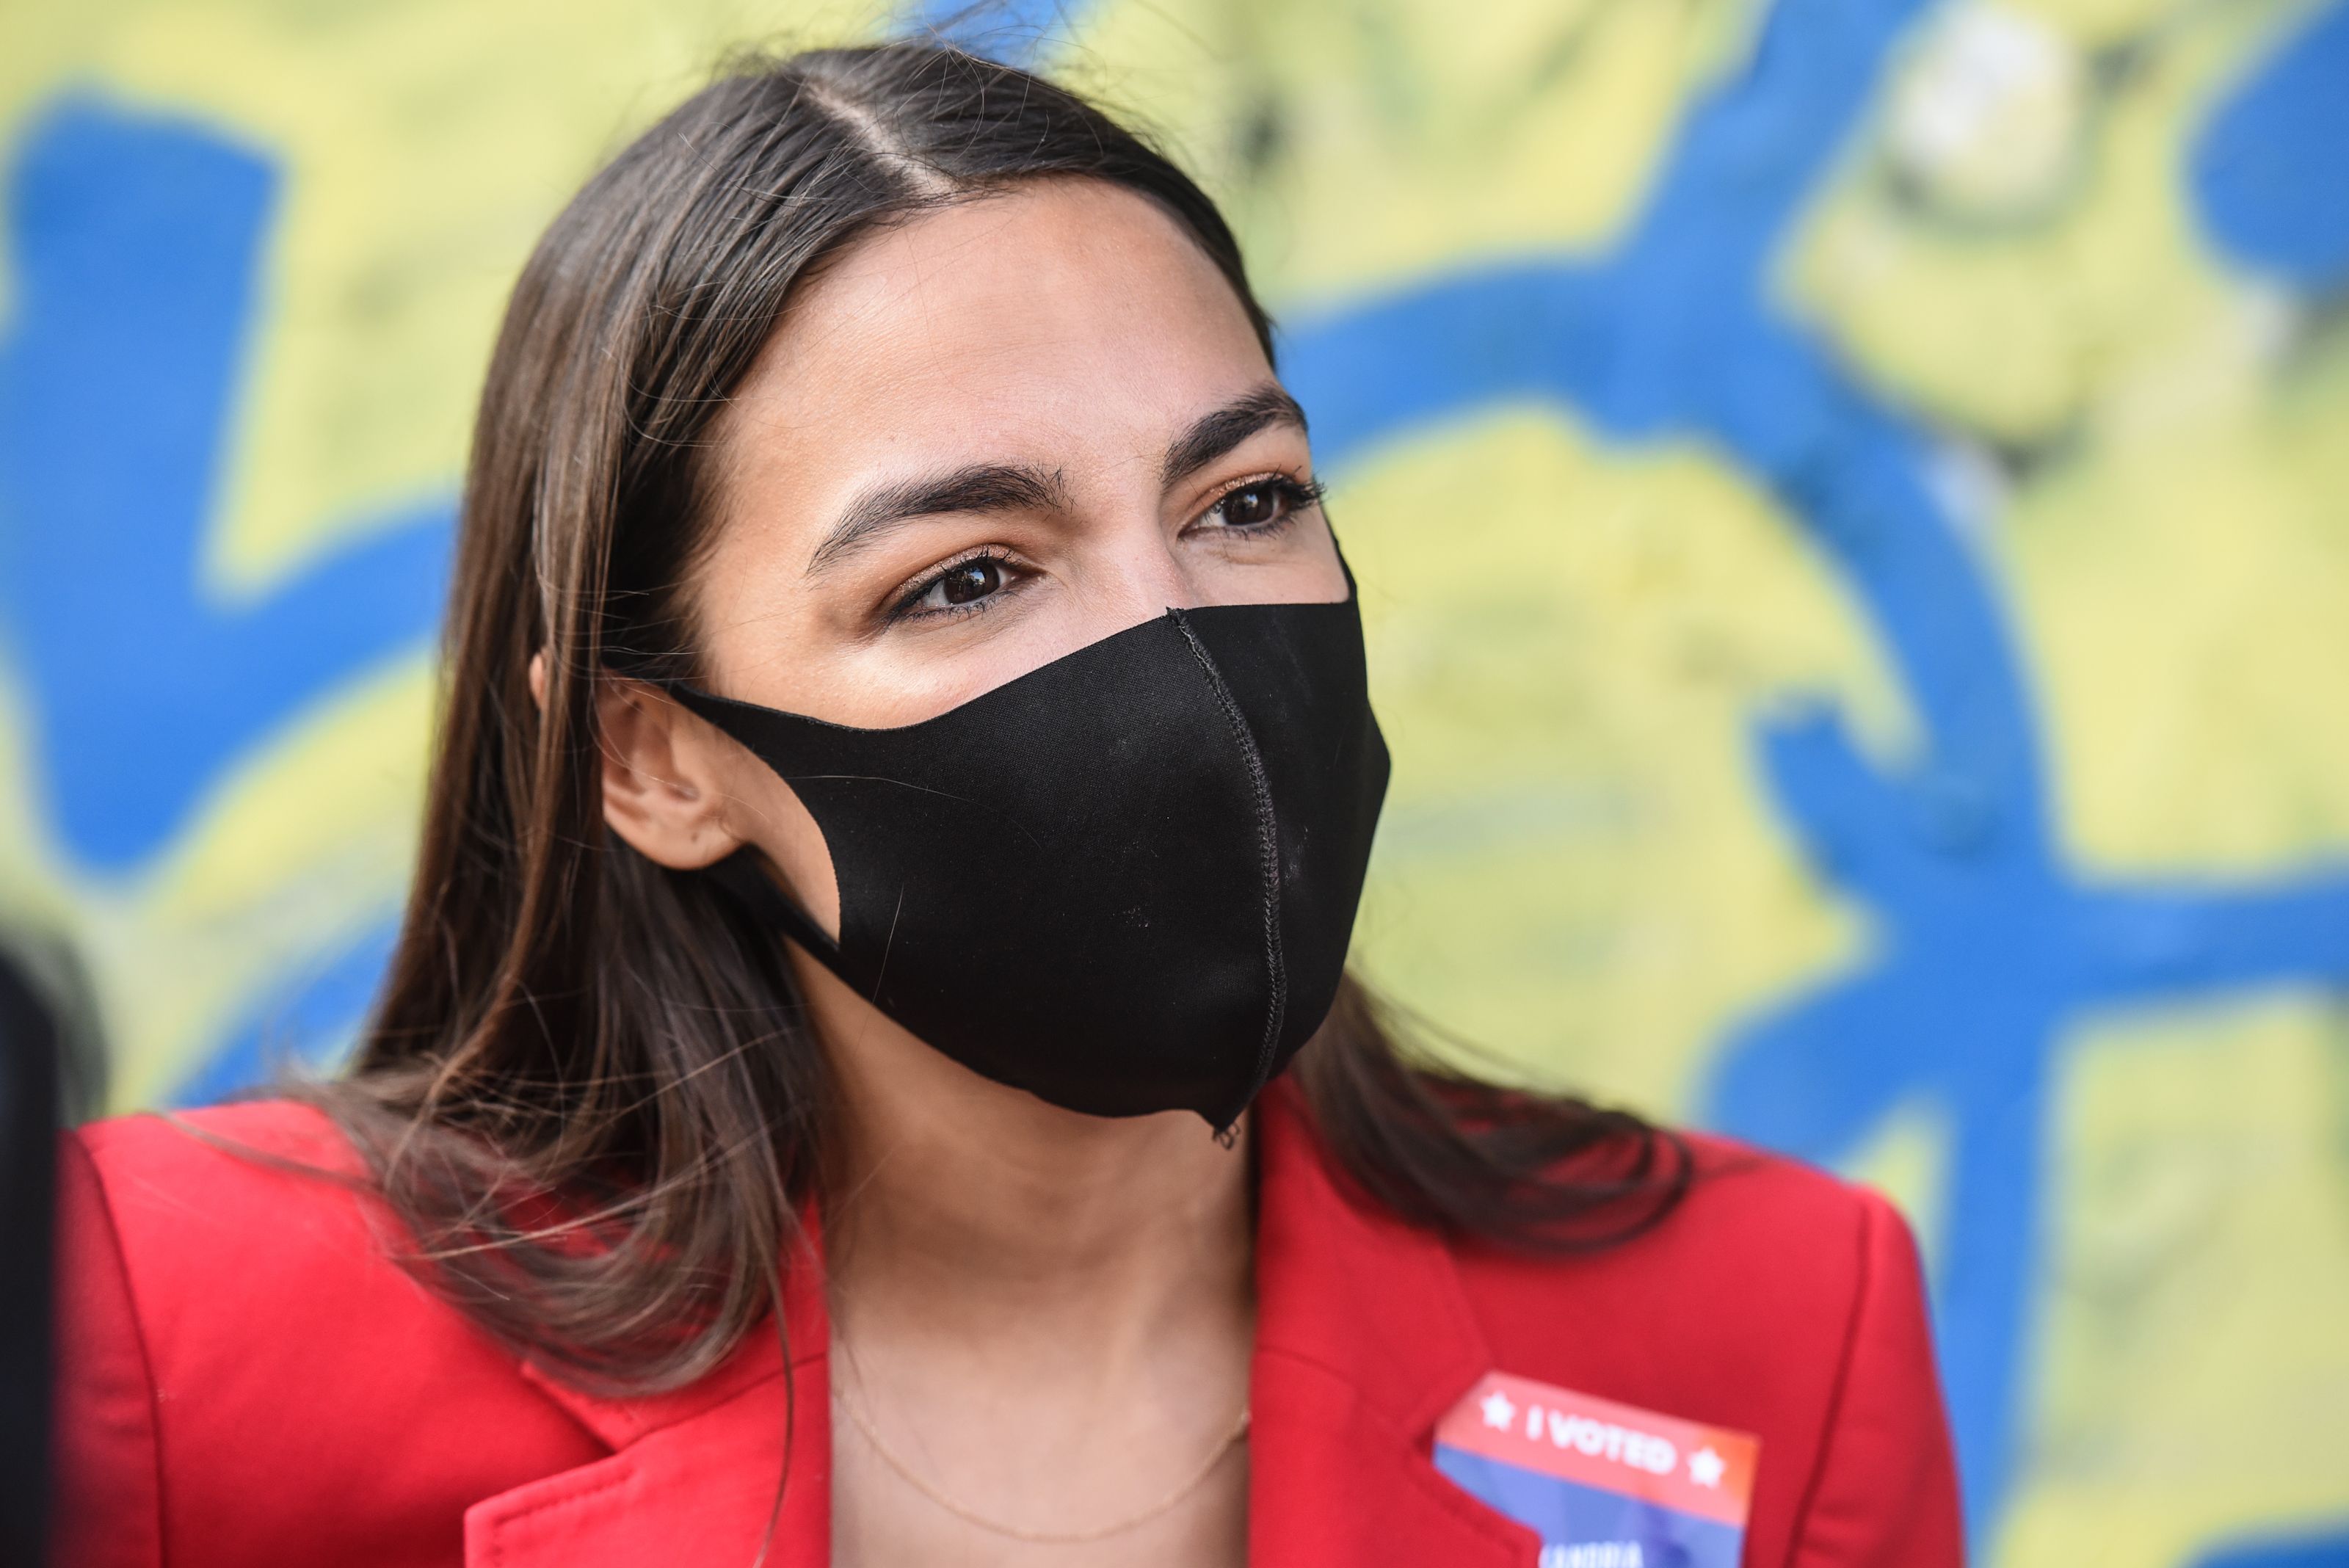 Alexandria Ocasio-Cortez appears at an event.